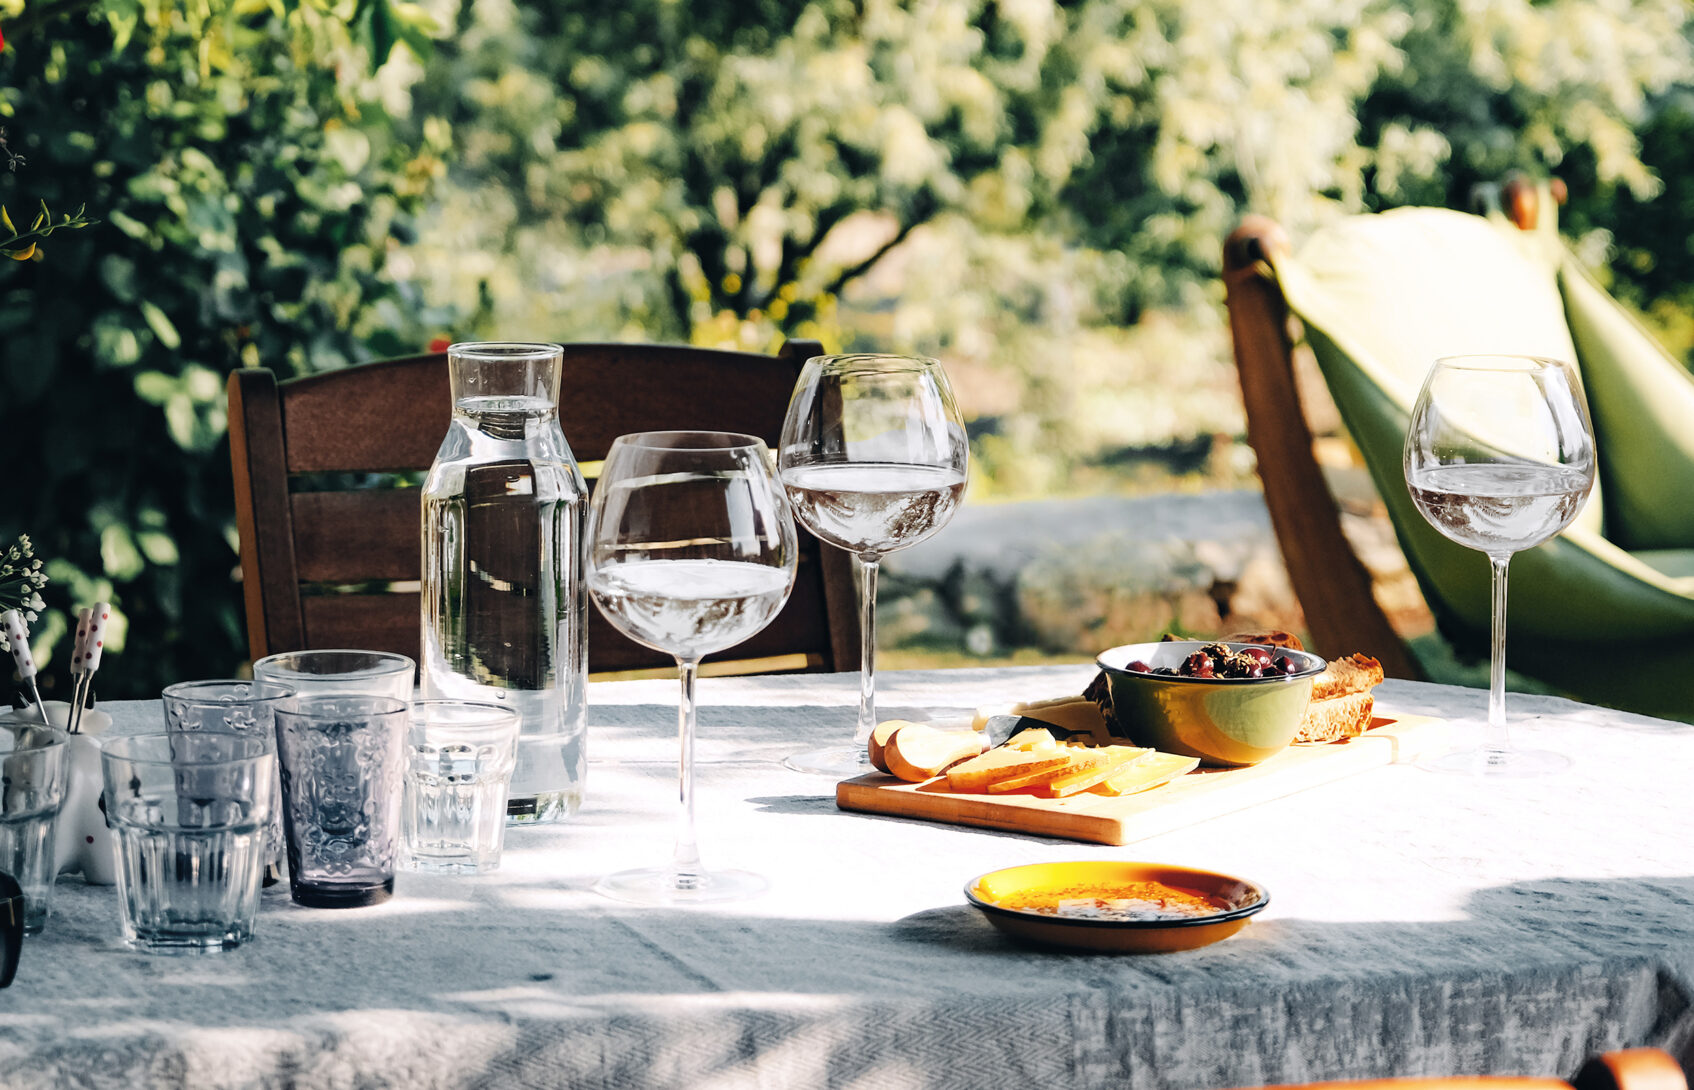 A sunlit oval table is set with snacks, glasses, and small plates to welcome family